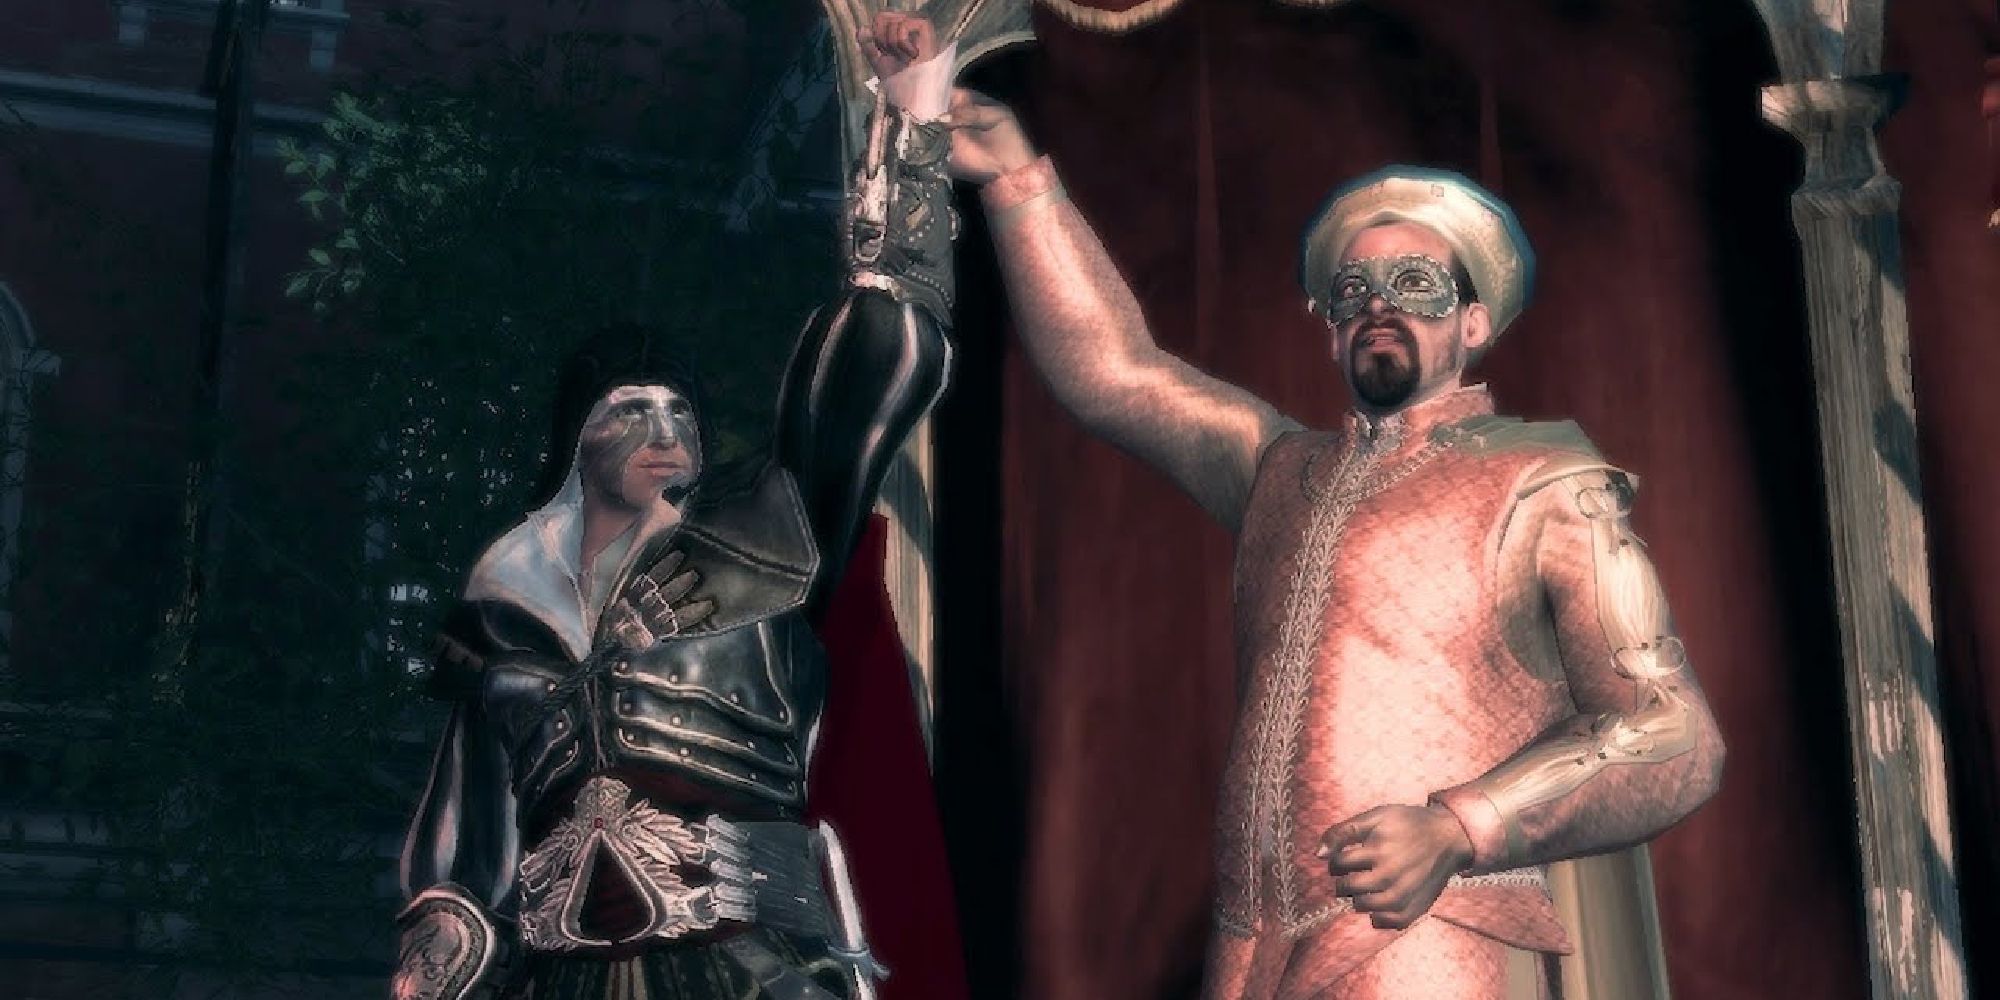 Ezio at the carnival, a games master holding his arm up in victory.